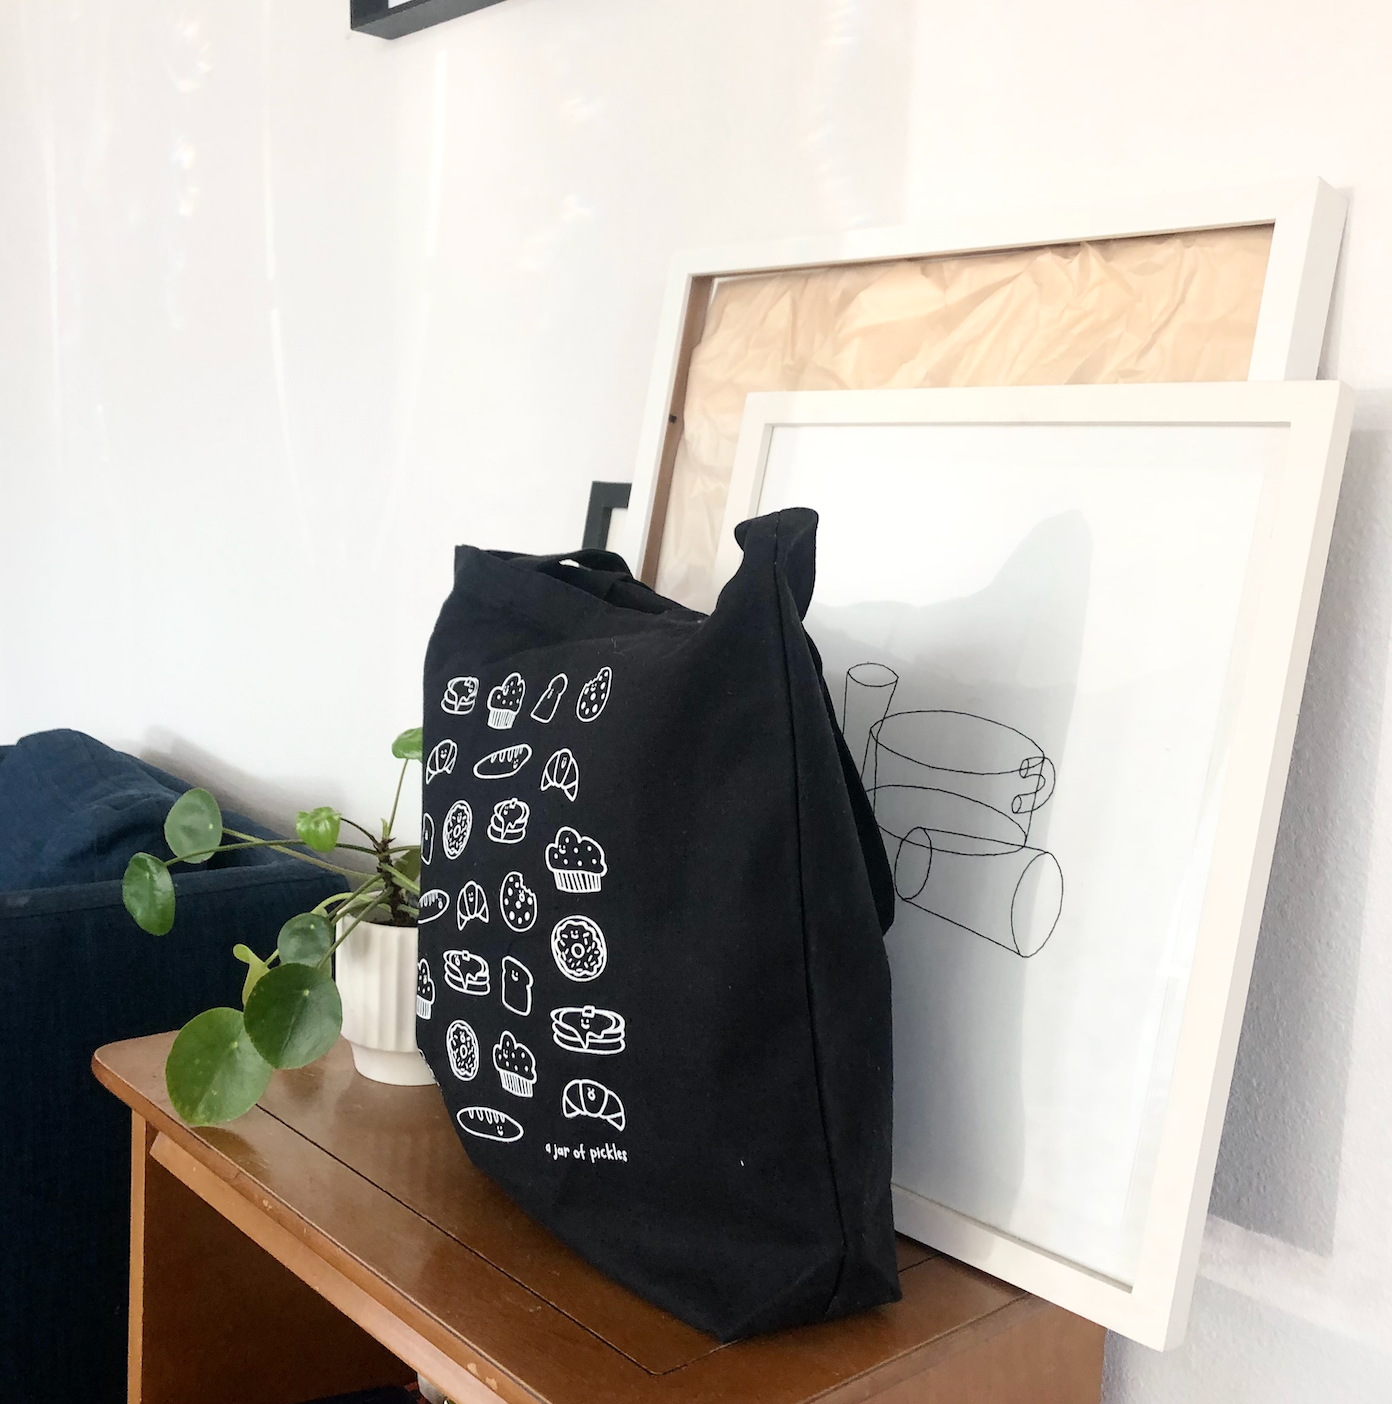 Lunar New Year Tote